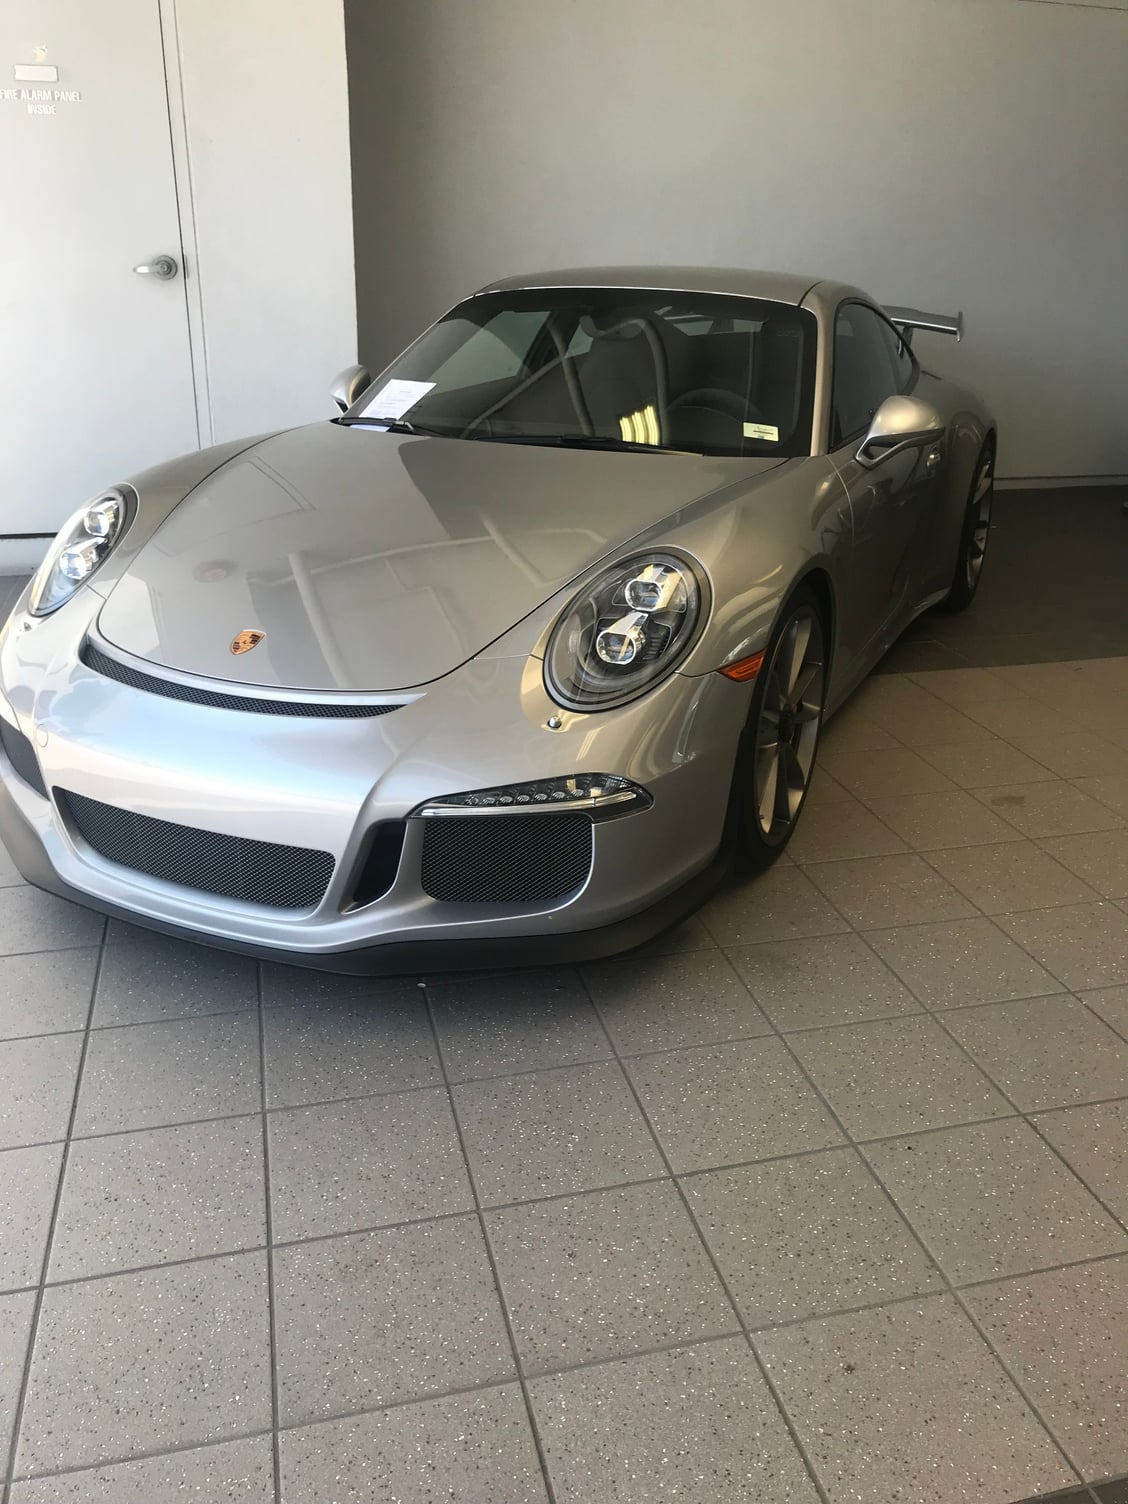 2015 Porsche GT3 - 2015 911 GT3 GT Silver - Used - VIN WP0AC2A99FS183268 - 9,600 Miles - 6 cyl - 2WD - Automatic - Silver - Los Angeles, CA 90064, United States